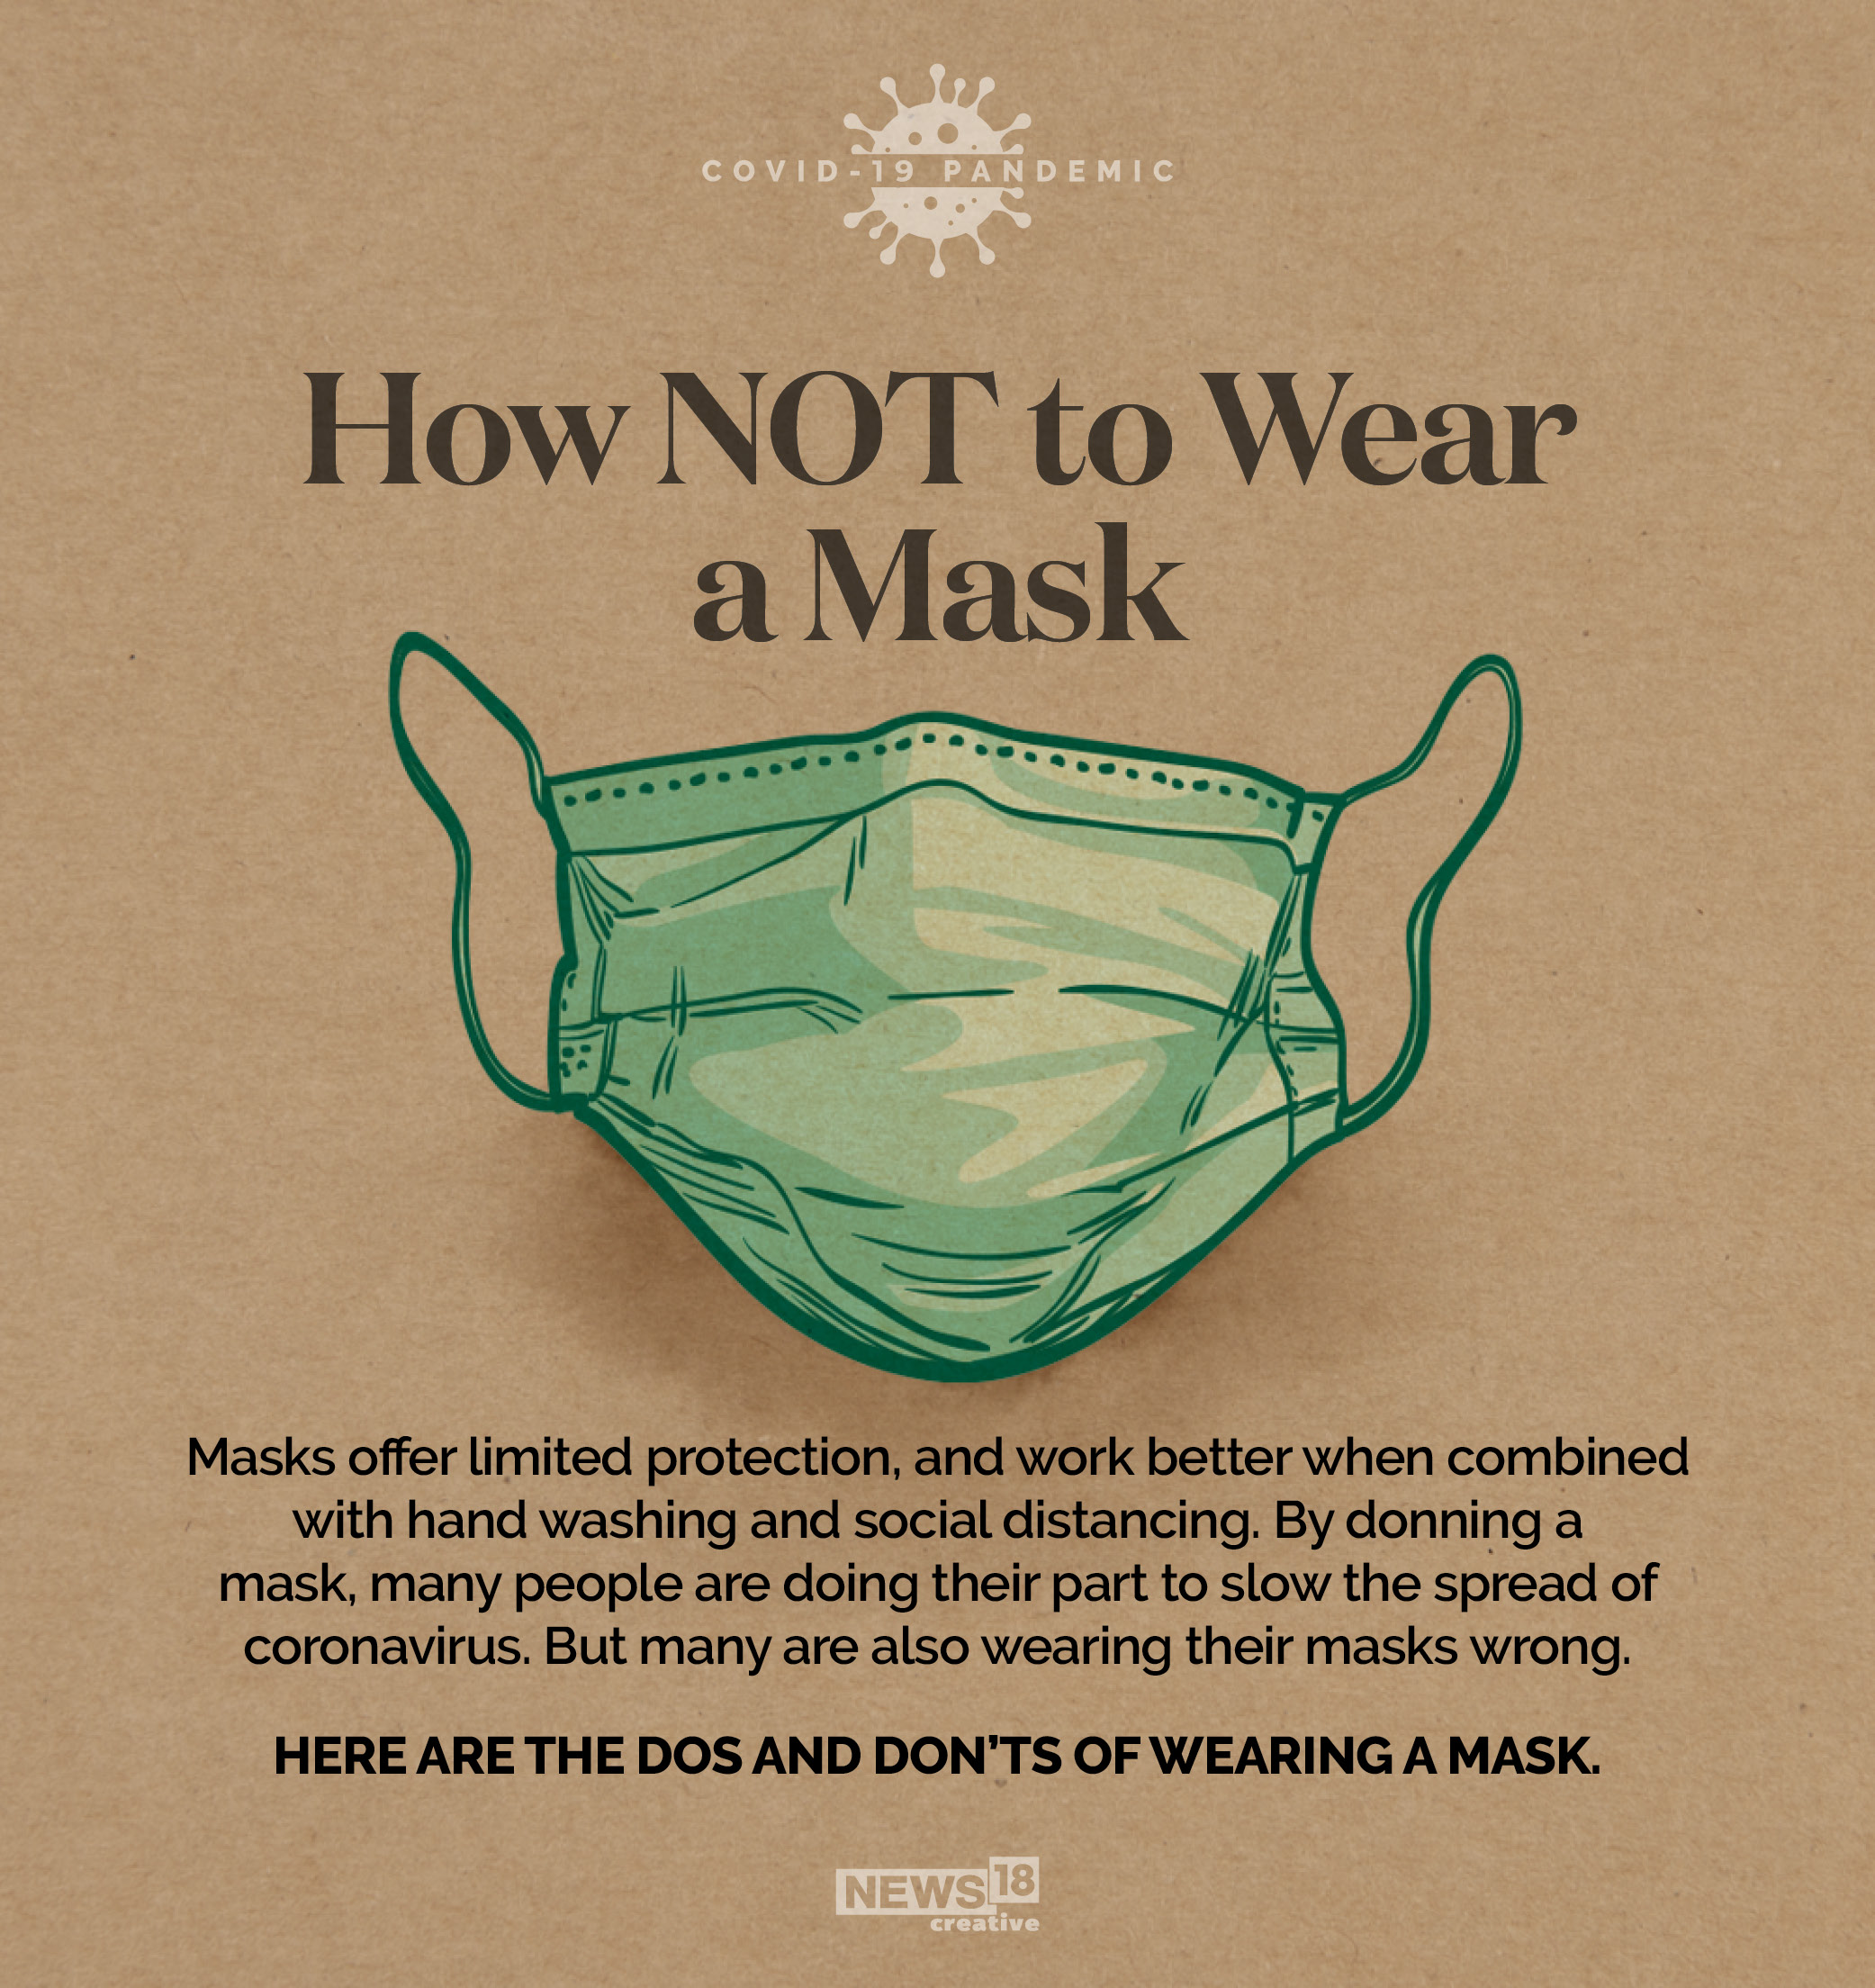 Reminder: How NOT to wear a mask